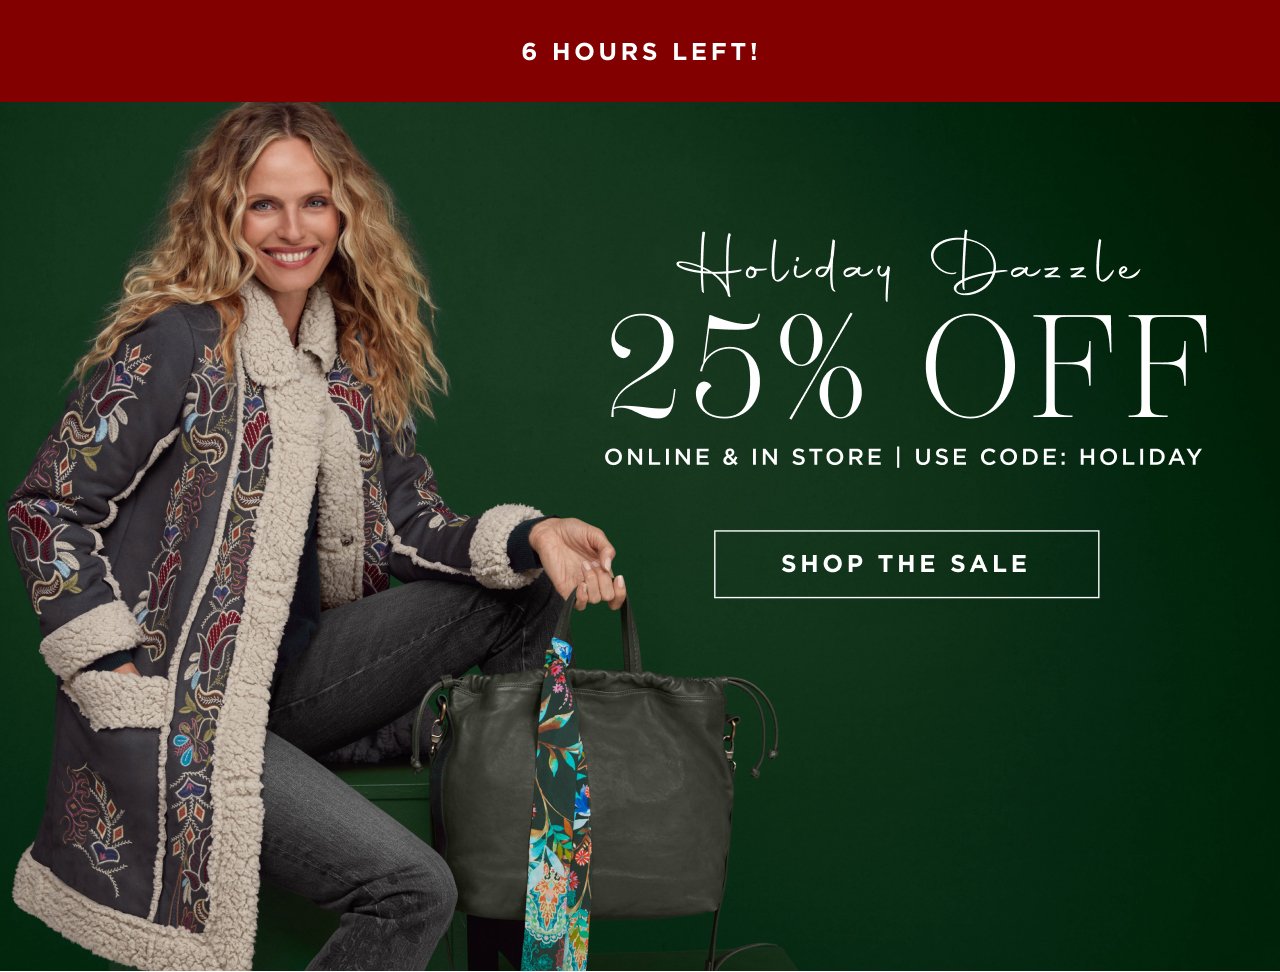 HOLIDAY DAZZLE 25% OFF ONLINE & IN STORE  Enjoy 25% off ONLINE & IN STORE | USE CODE: HOLIDAY SHOP THE SALE